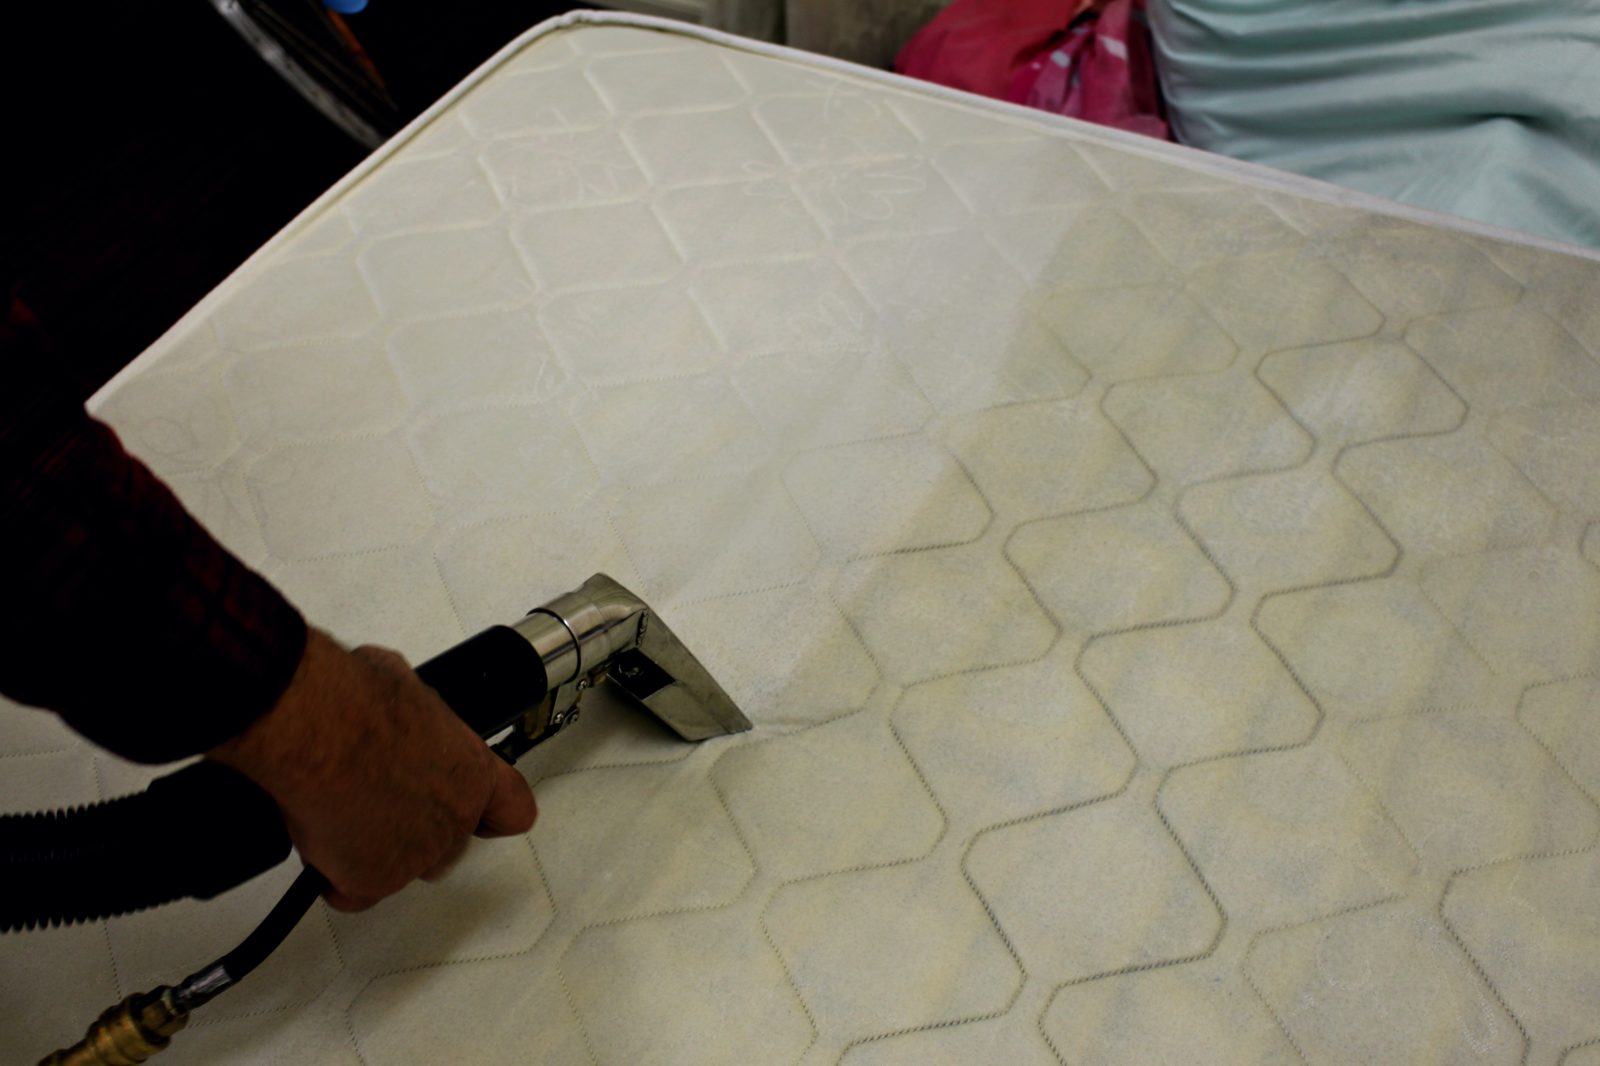 cleaning ikea mattress cover